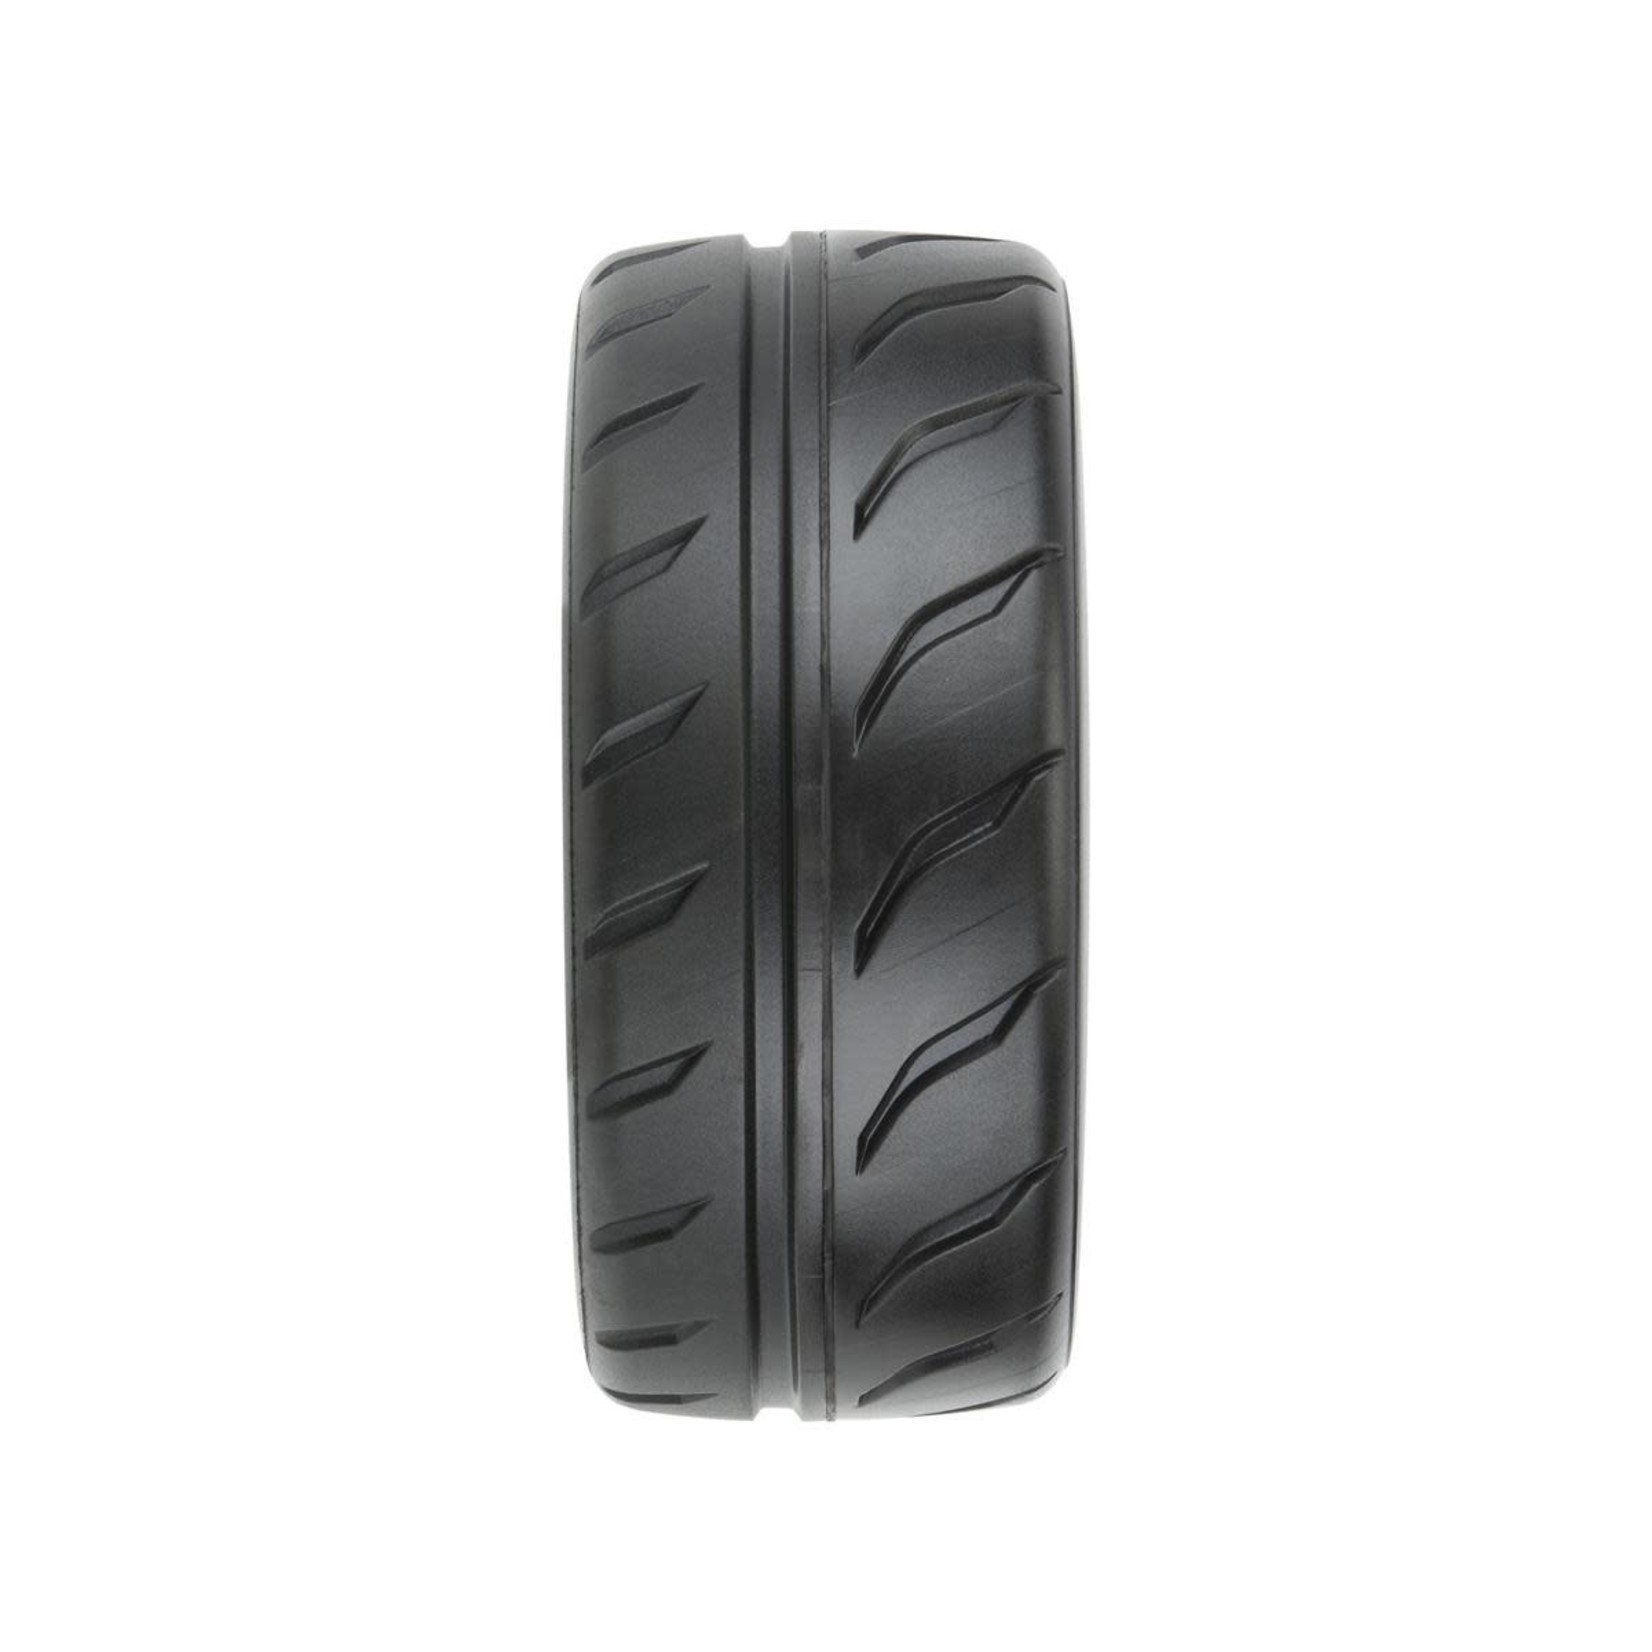 Pro-Line Pro-Line Toyo Proxes R888R 42/100 2.9" Belted 5-Spoke Pre-mounted Tires (2) (S3) #10199-10